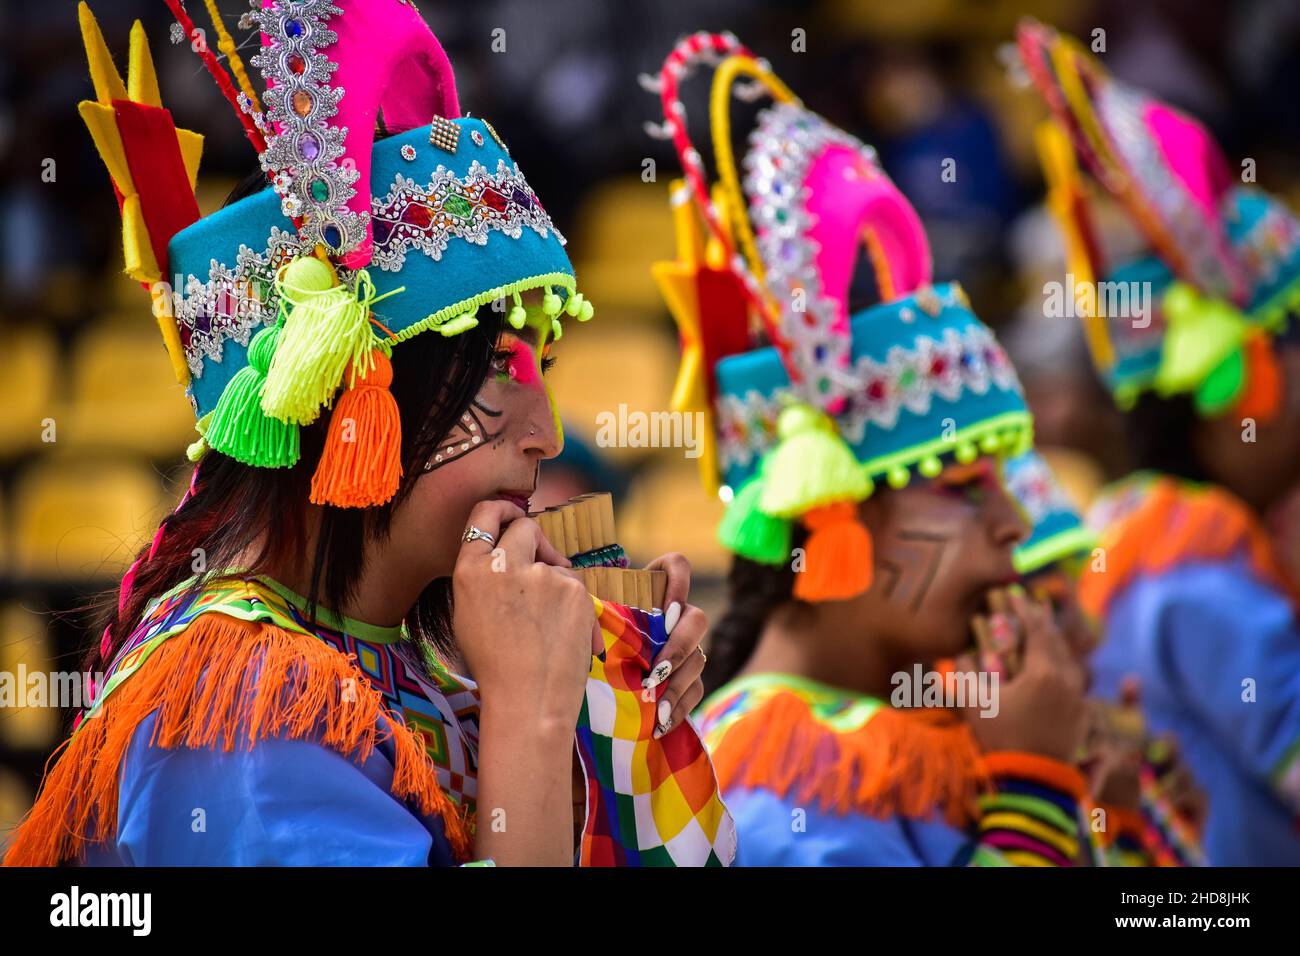 Cultural groups from pasto and other municipalities of Nariño perform traditional dances at the Carnival of Blancos Y Negros on January 3, 2022 in Pasto - Nariño, Colombia. This UNESCO-recognized carnival takes place every January in the Southern Andean city of Pasto. The "Carnaval de Negros y Blancos" has its origins in a mix of Amazonian, Andean and Pacific cultural expressions though art, dances, music and cultural parties. Stock Photo